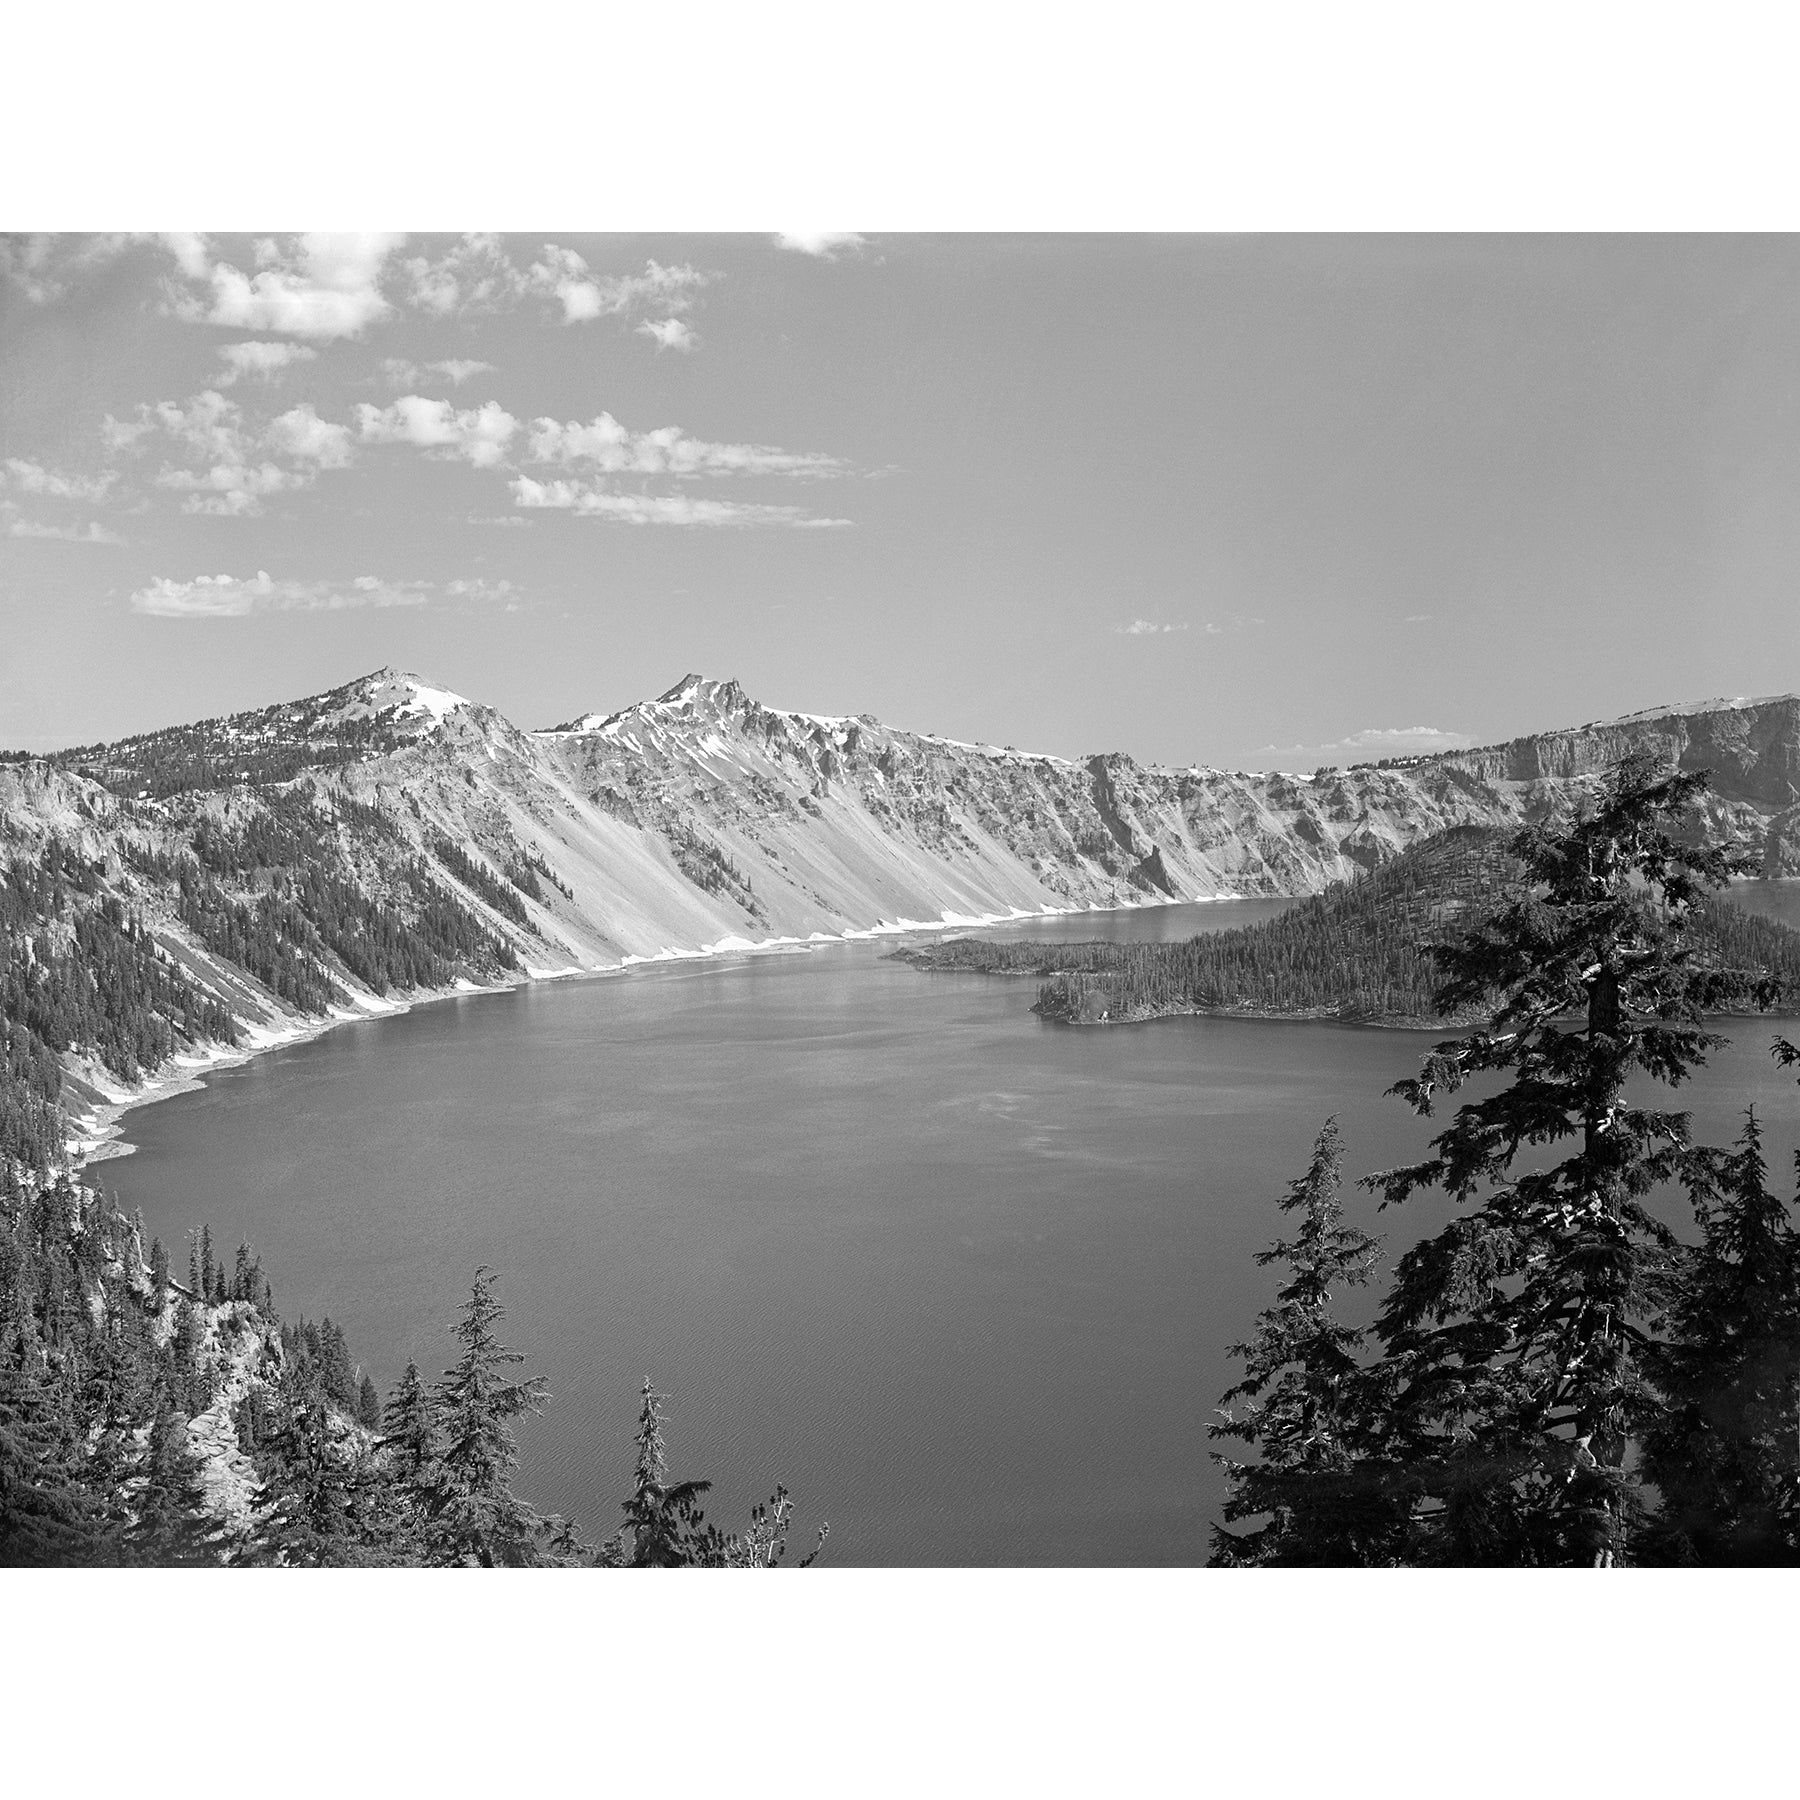 A vintage photograph of Crater Lake National Park